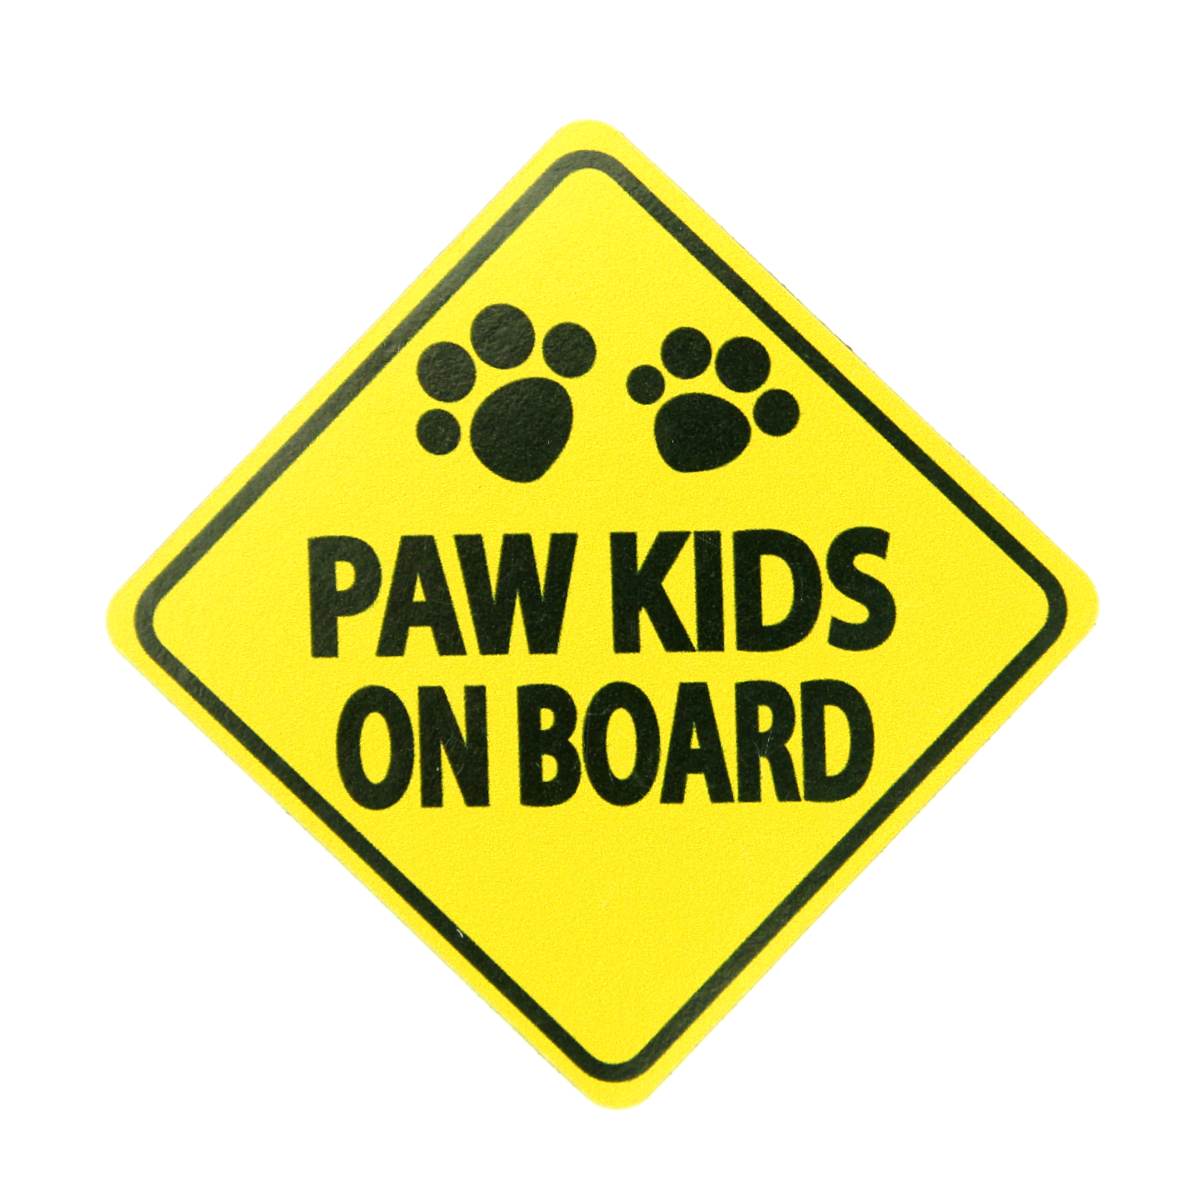 Caution Magnet - Paw Kids on Board 